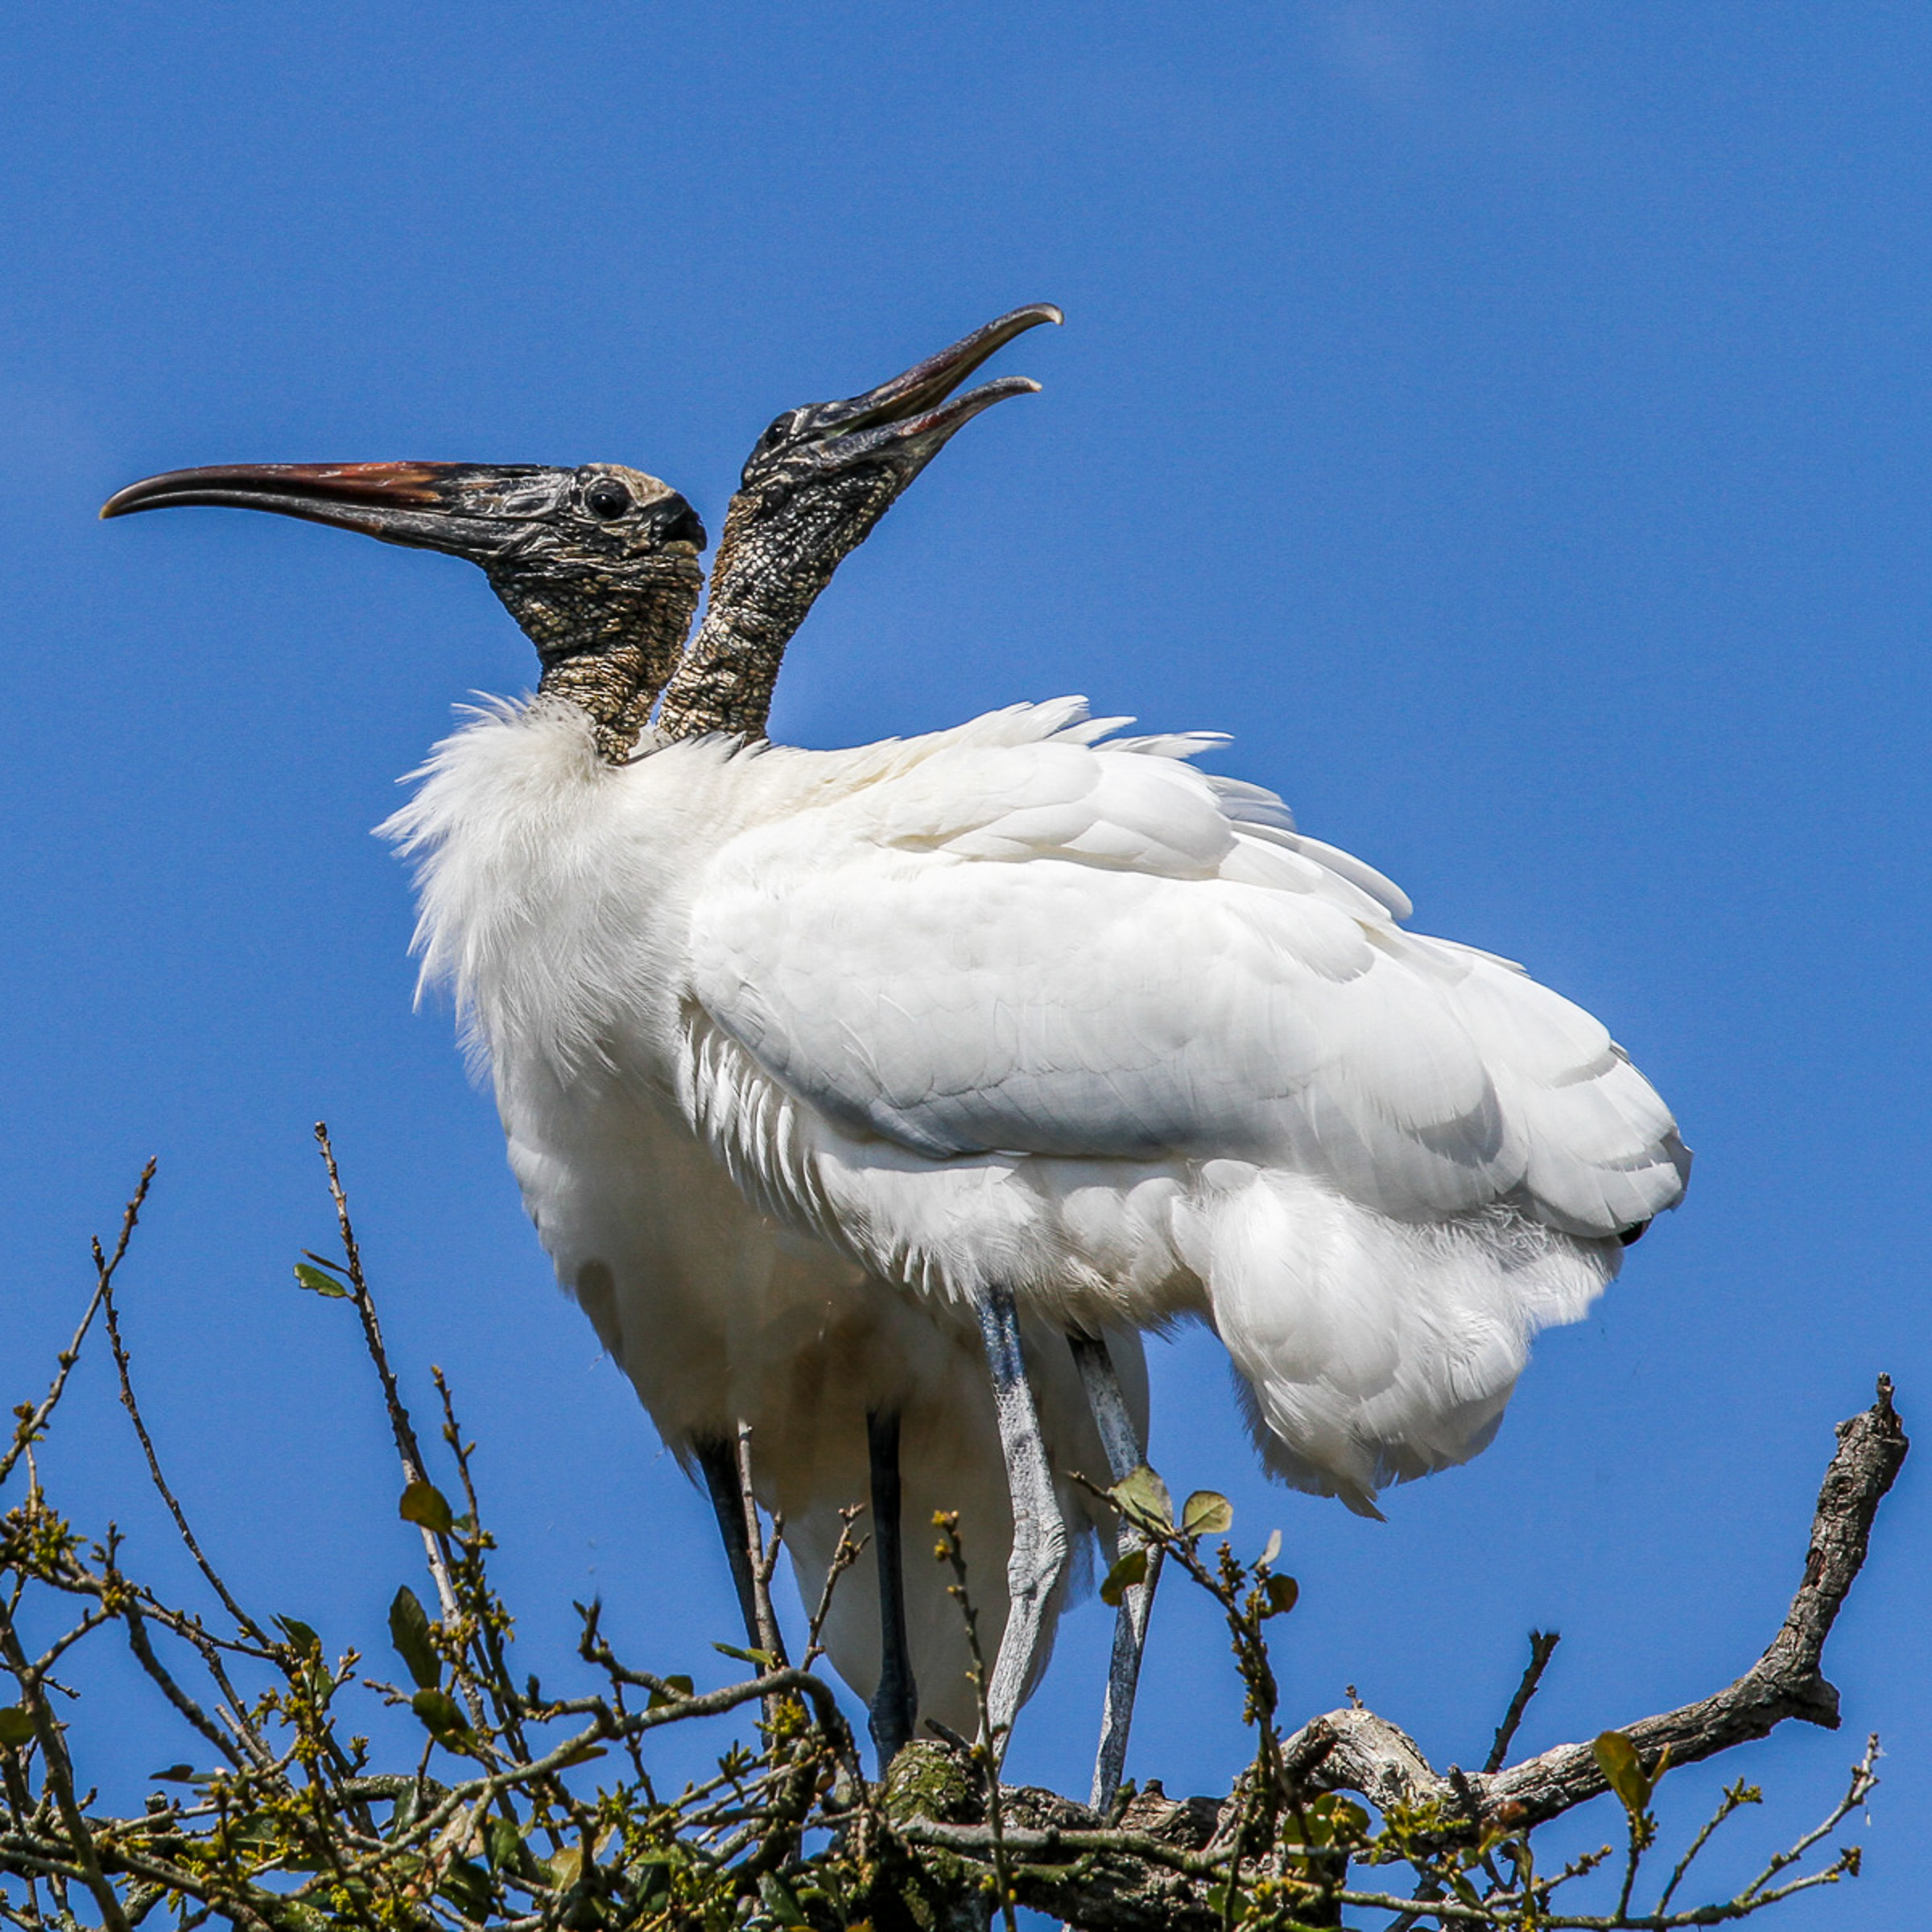 Two wood storks